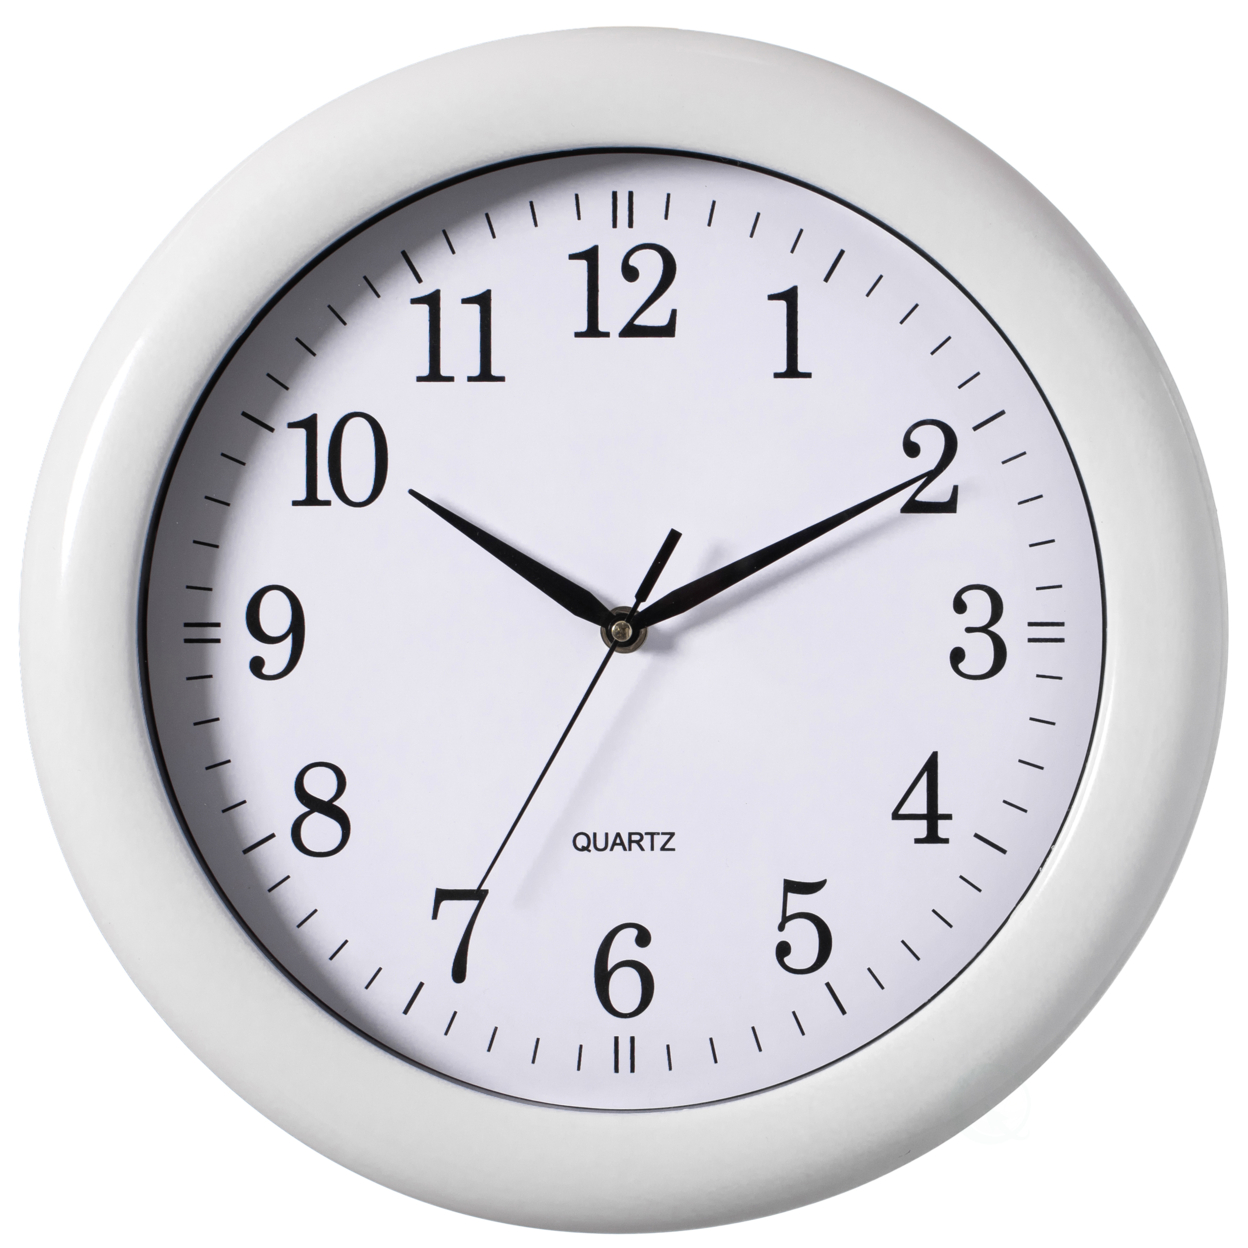 Decorative Classic Round Wall Clock For Living Room, Kitchen, Dining Room, Plastic - White